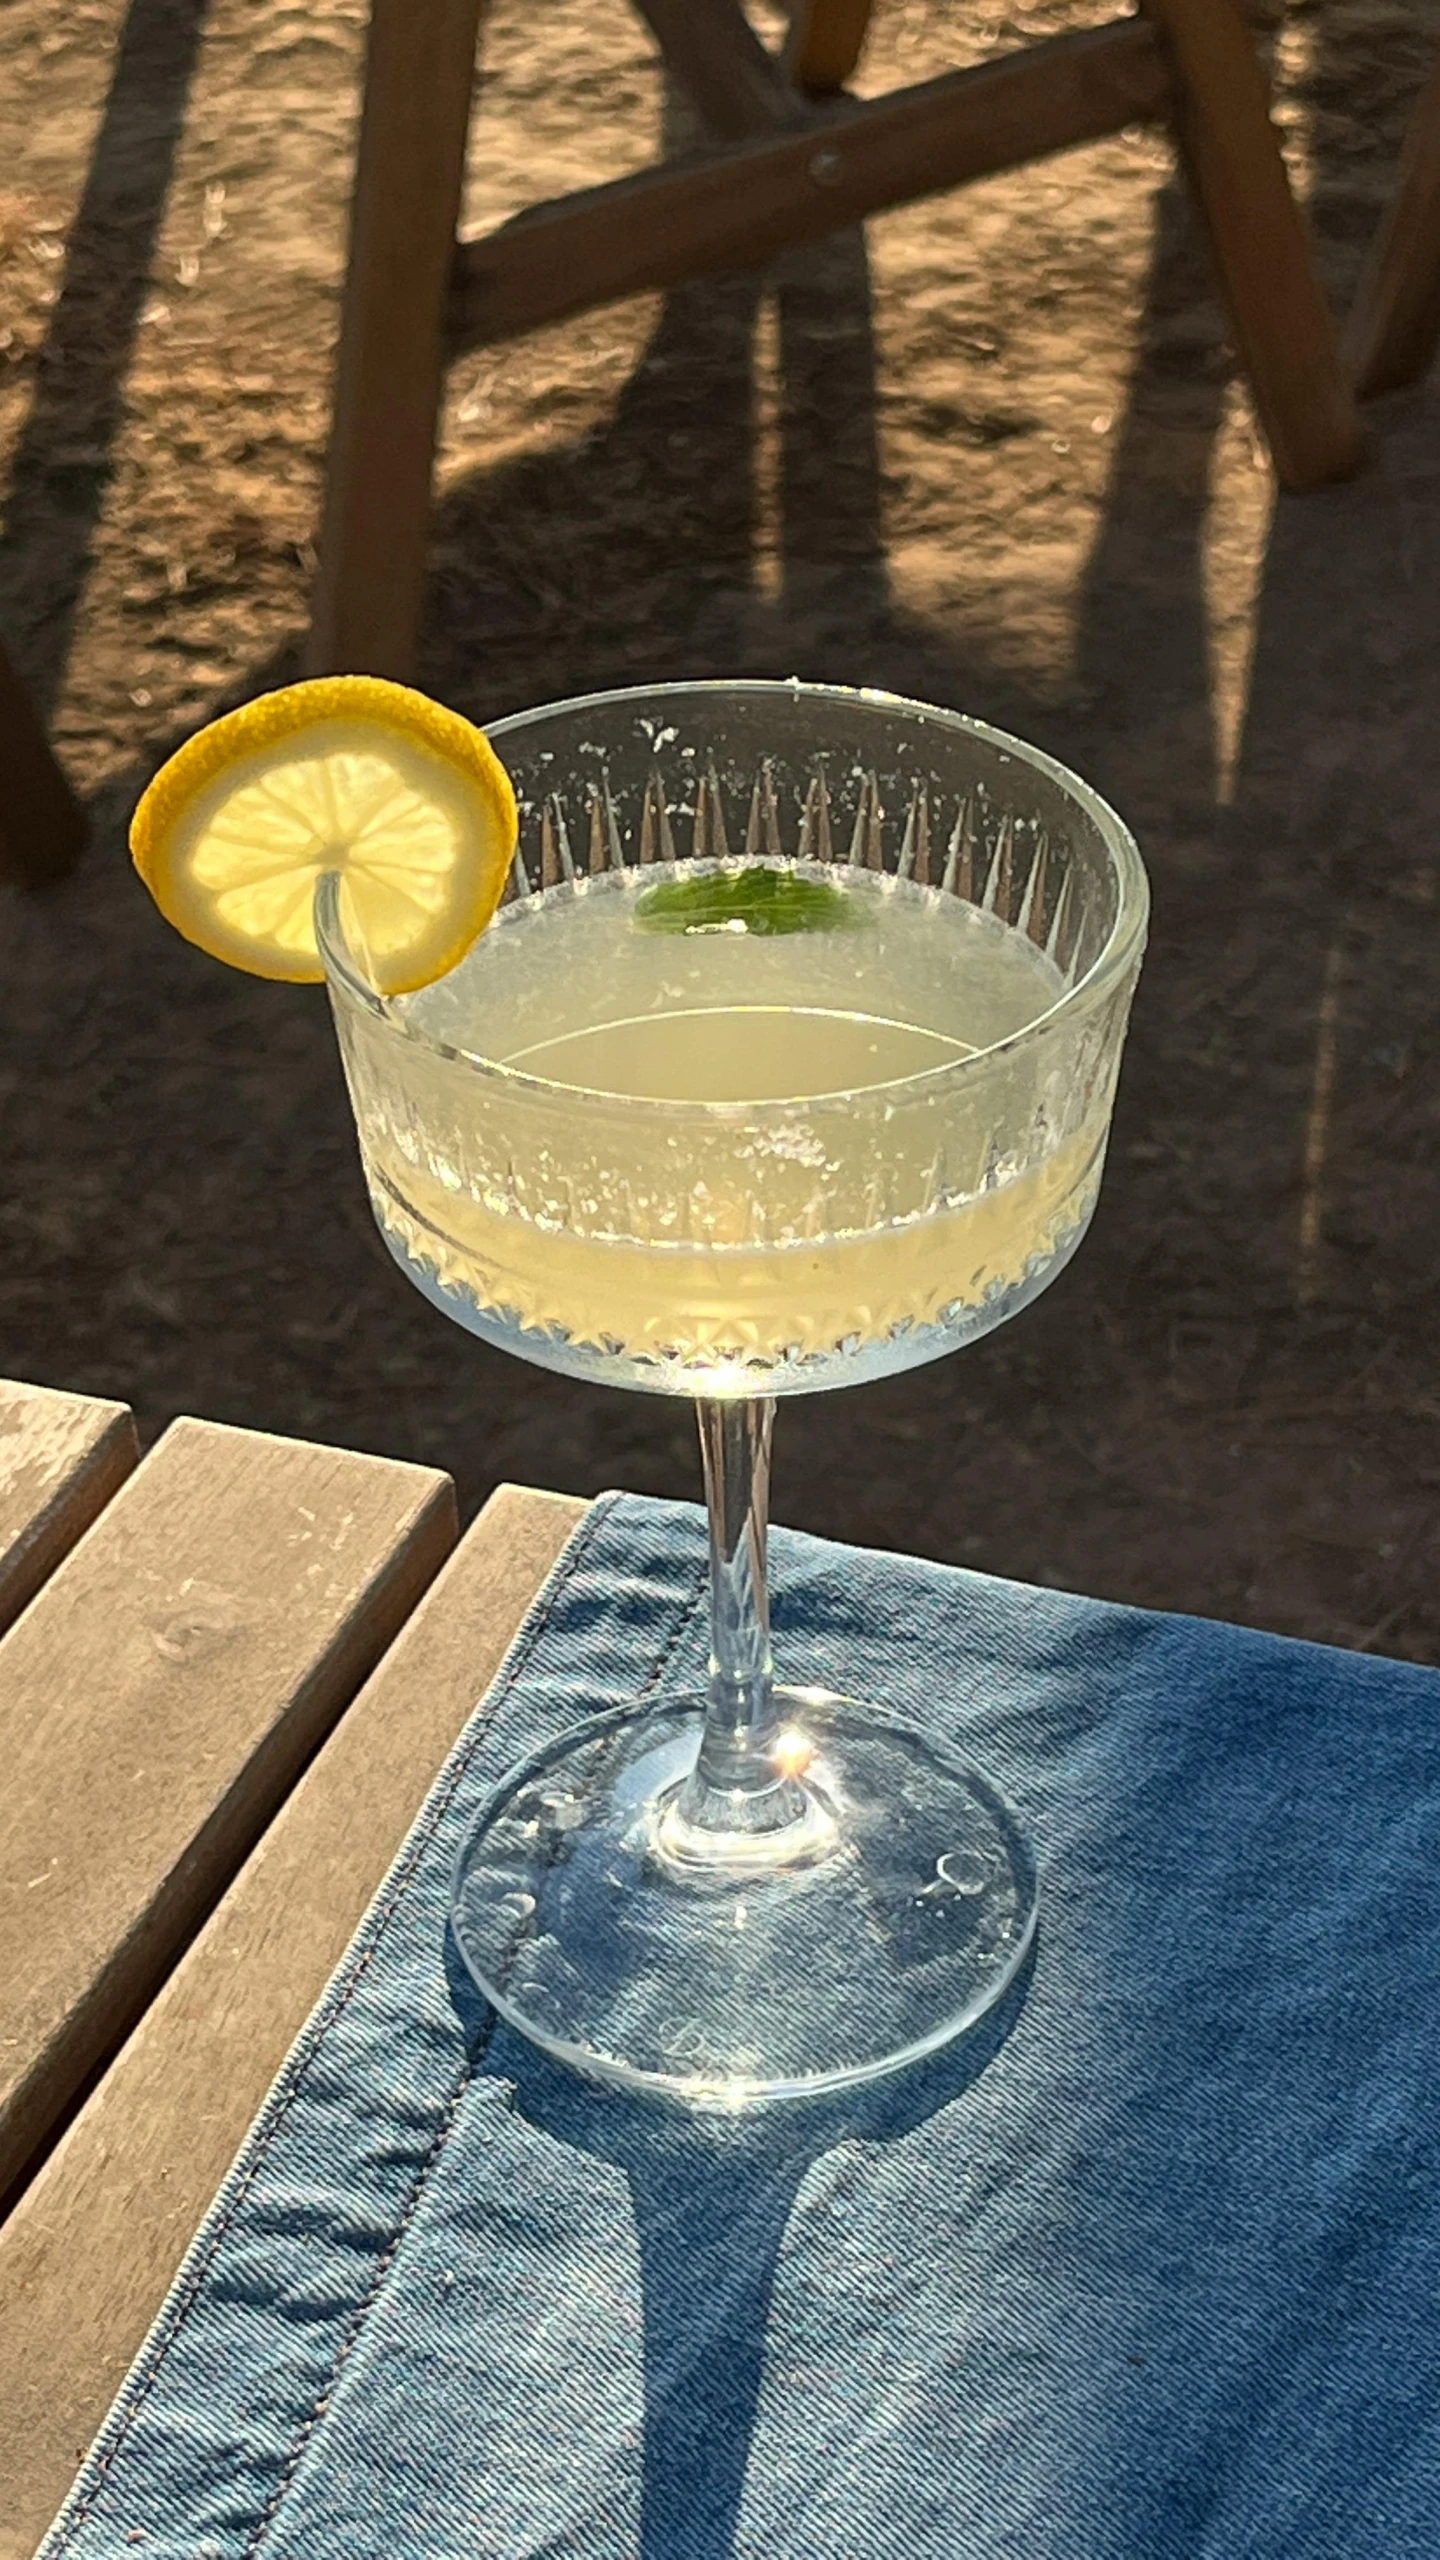 a very tasty looking martini is on a blue cloth